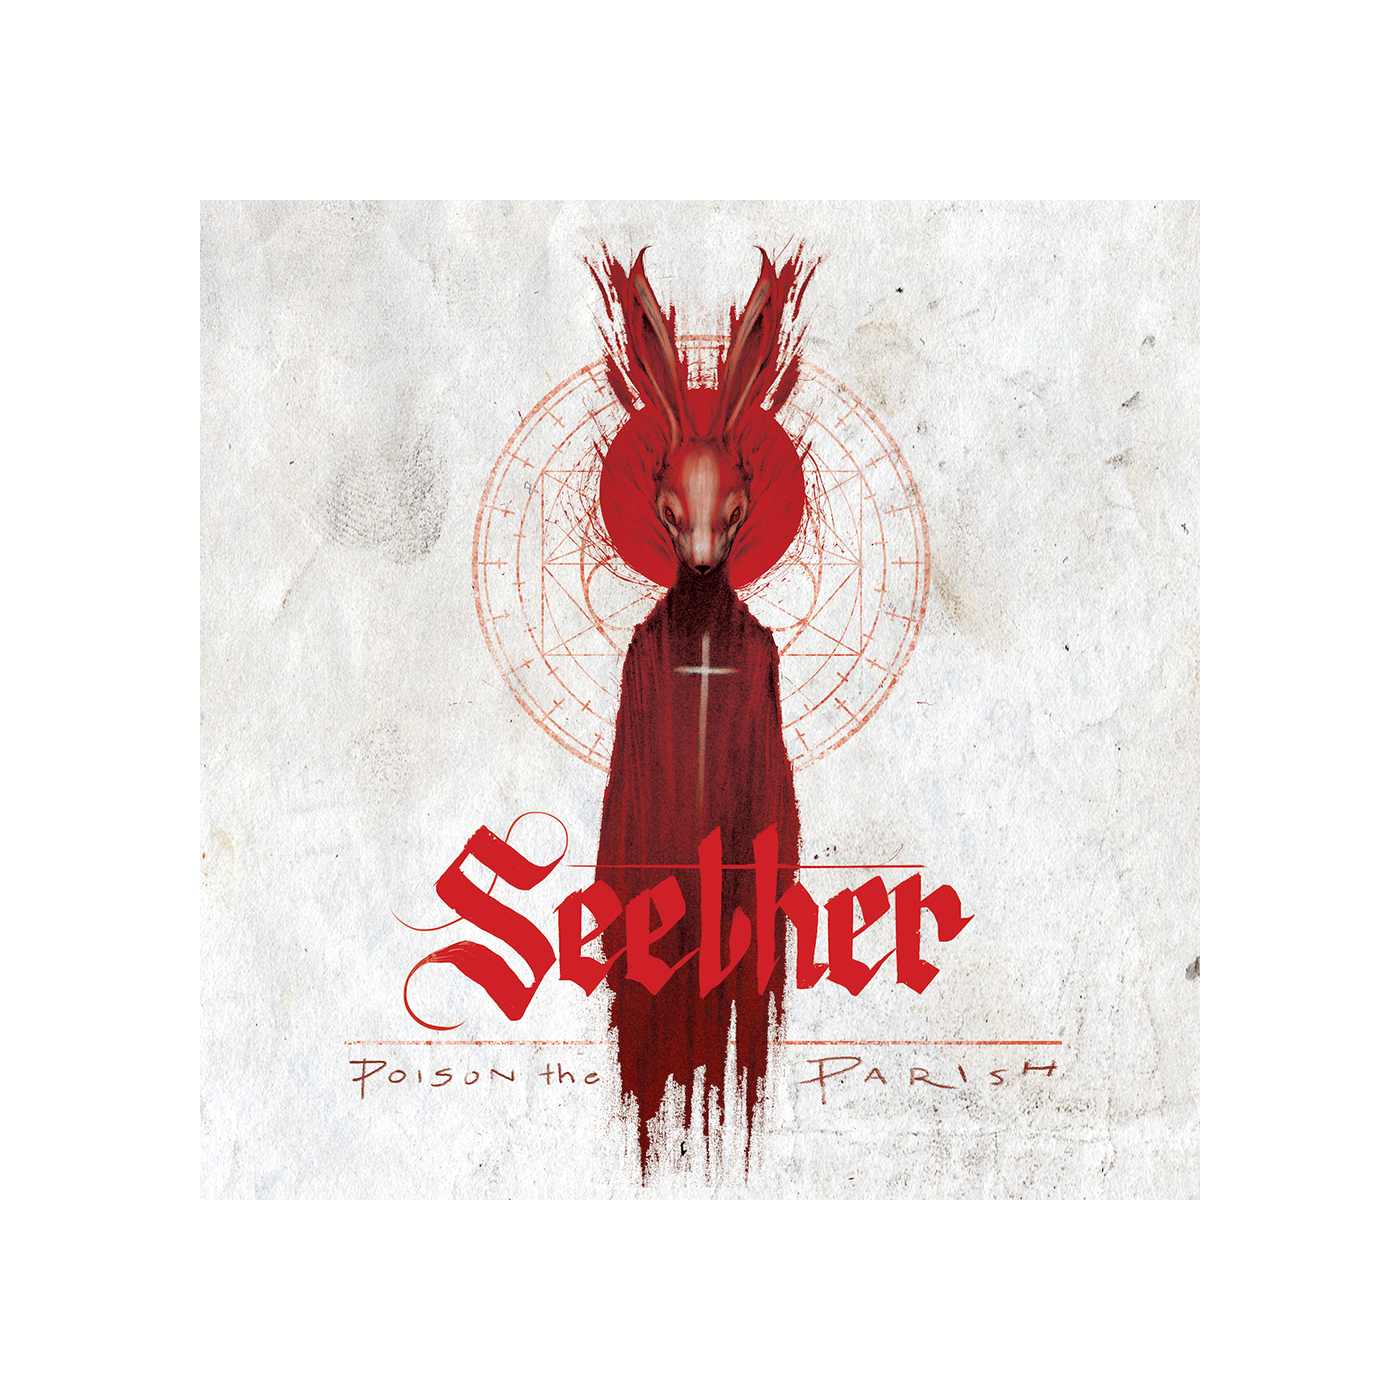 Seether - Poison The Parish Deluxe CD